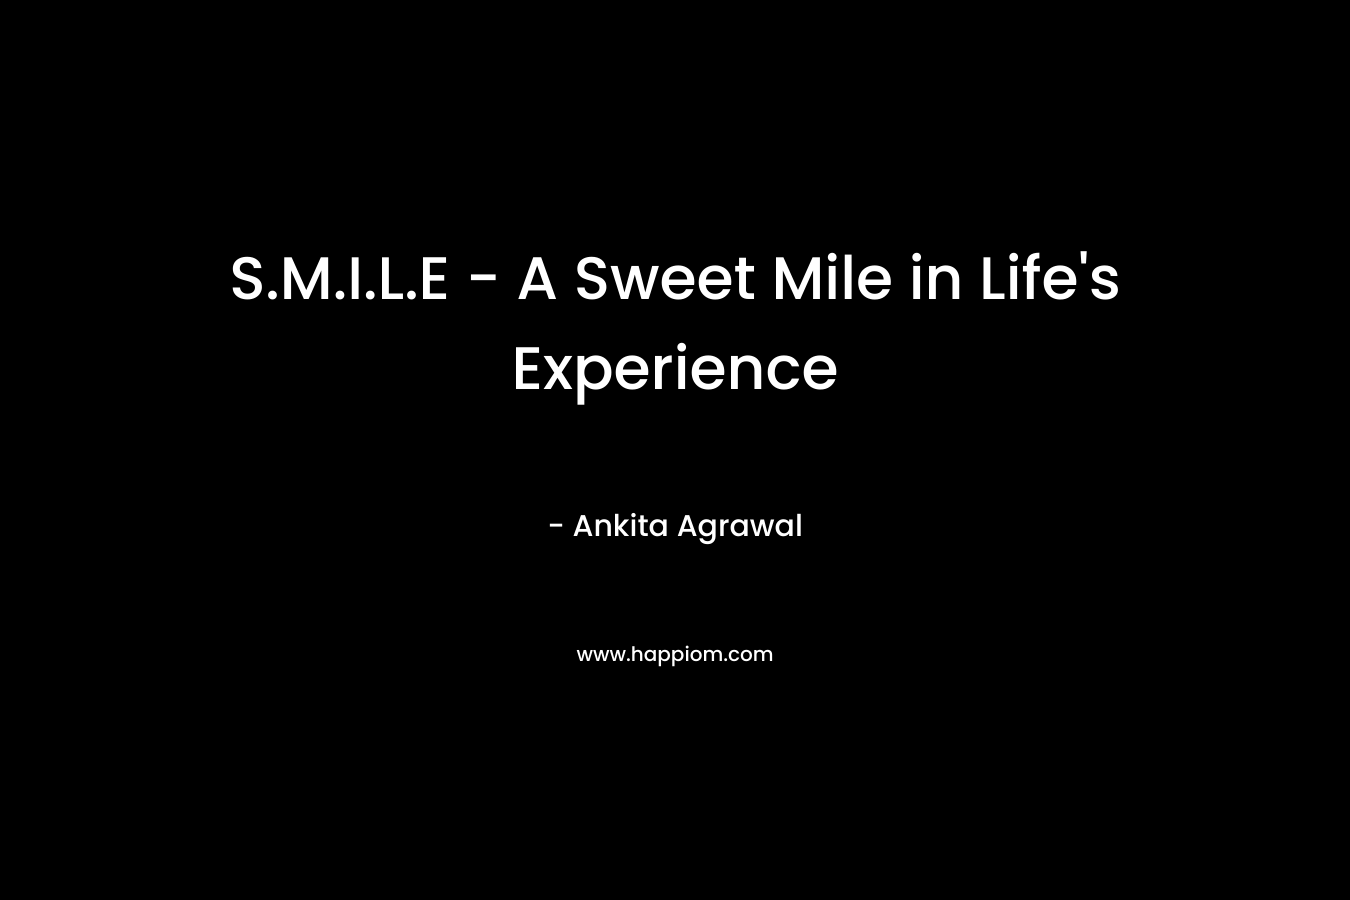 S.M.I.L.E - A Sweet Mile in Life's Experience